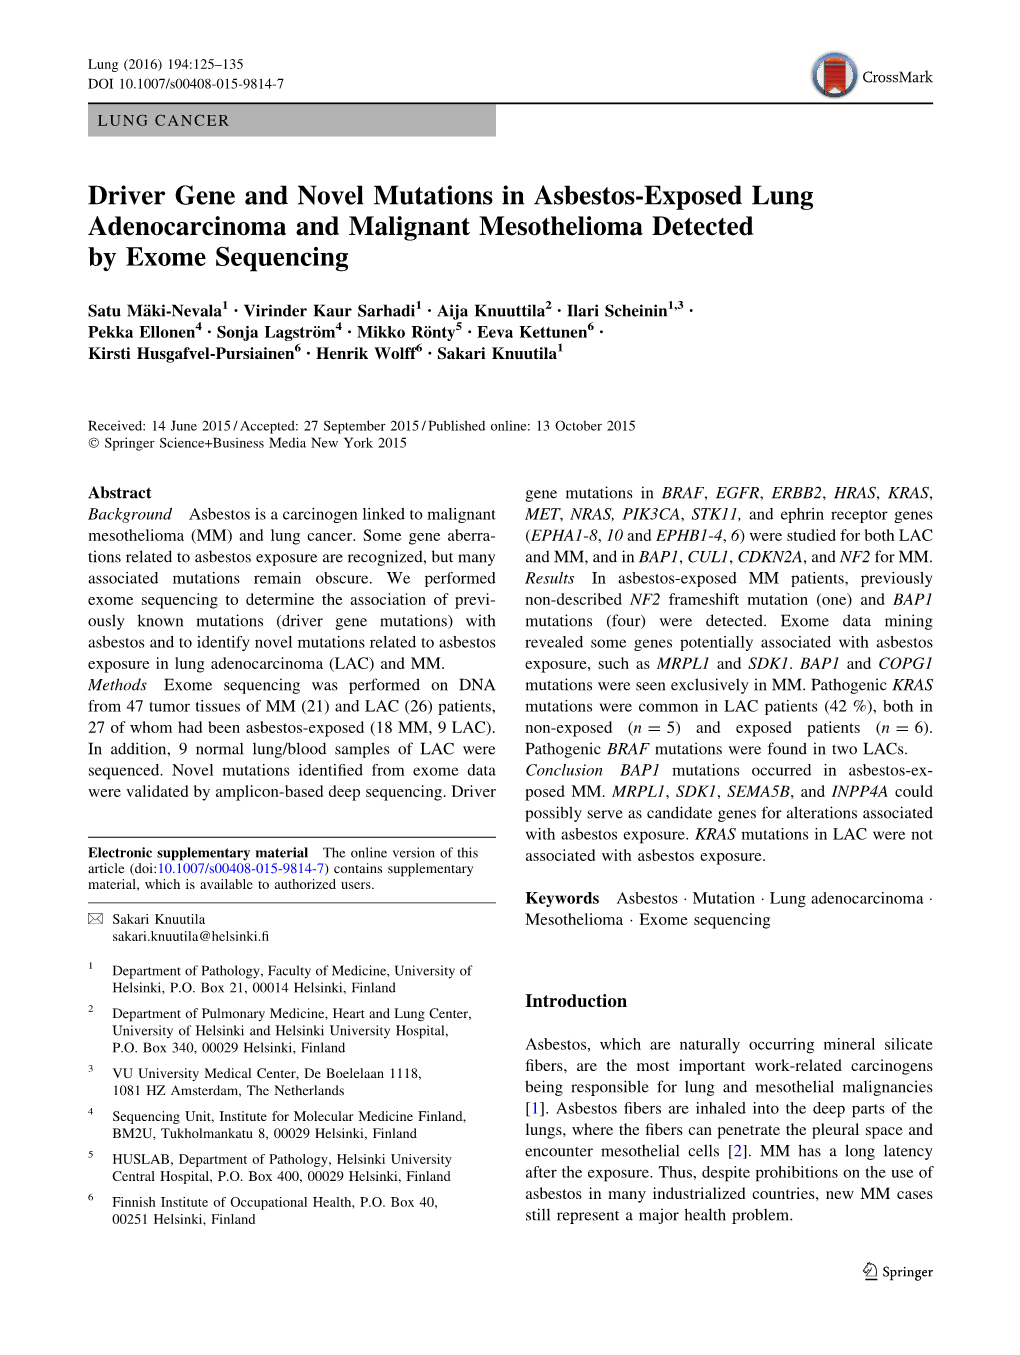 Driver Gene and Novel Mutations in Asbestos-Exposed Lung Adenocarcinoma and Malignant Mesothelioma Detected by Exome Sequencing